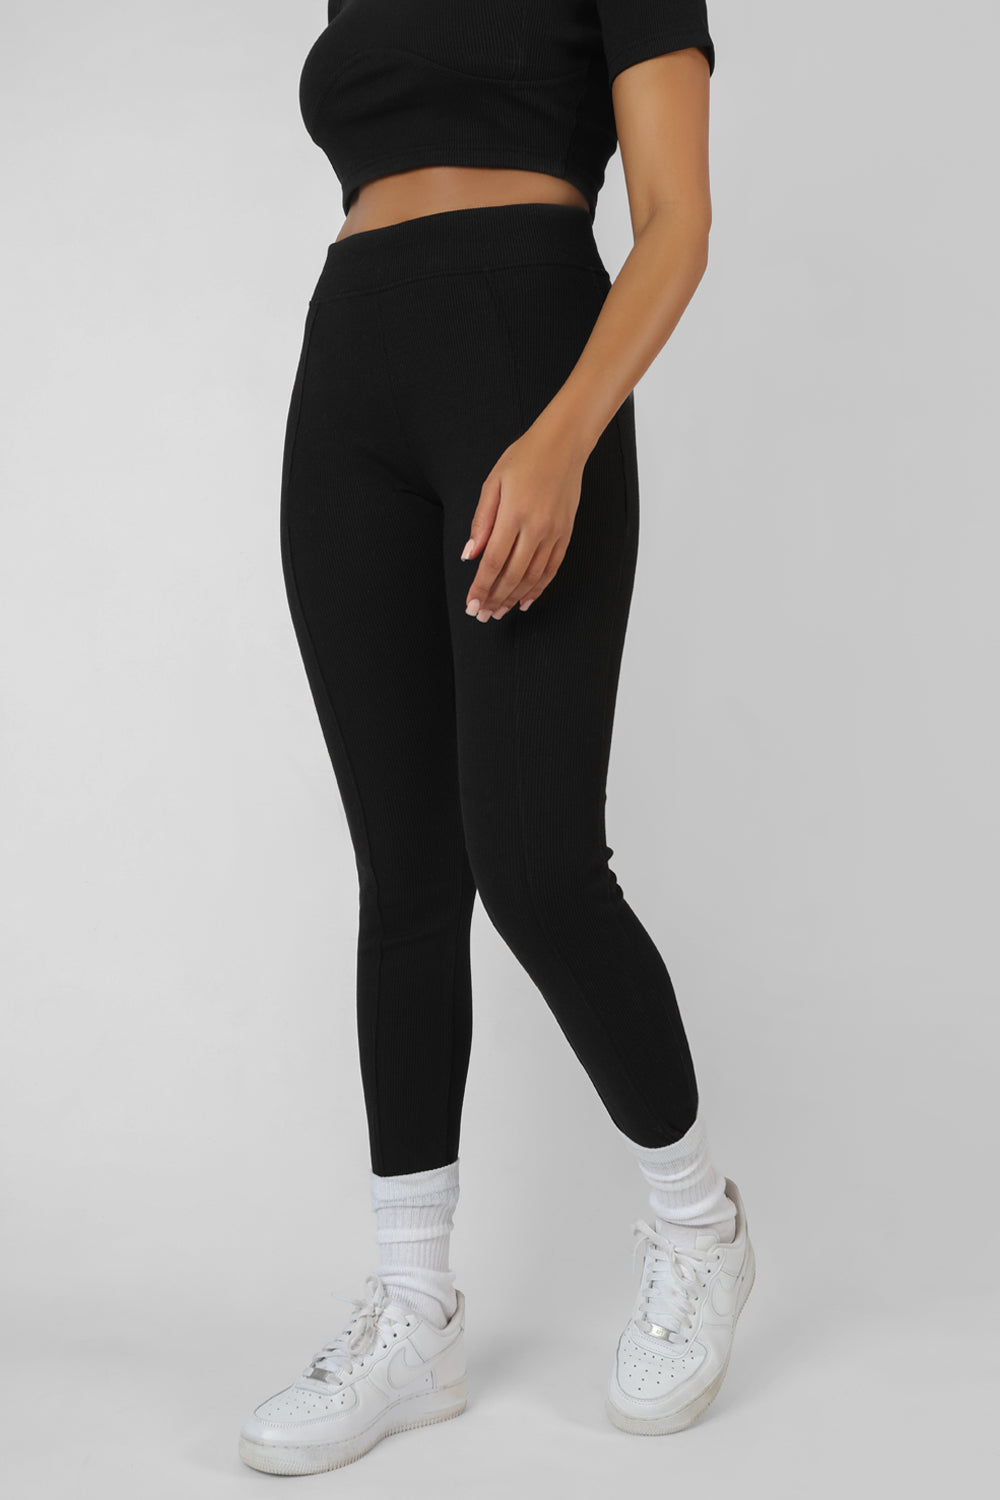 Leggings without Front Seam Comfortable Clothes for Women Leather Leggings  High Waisted Pleather Pu Pants& Warm Pants Cotton Boxers for Women -  Walmart.com